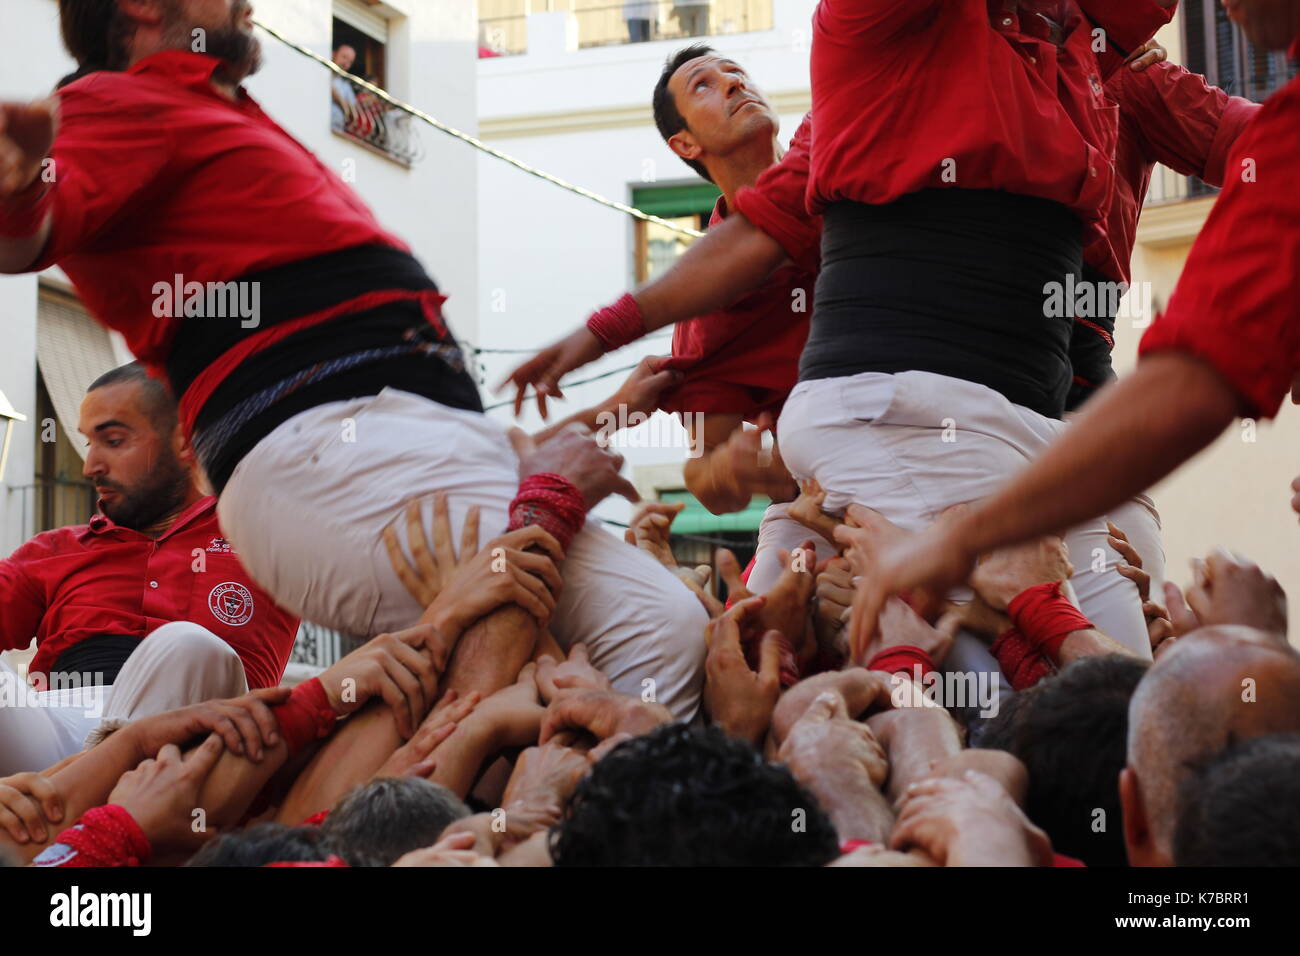 People making human towers, a traditional spectacle in Catalonia called 'castellers', with people climbing and m Stock Photo